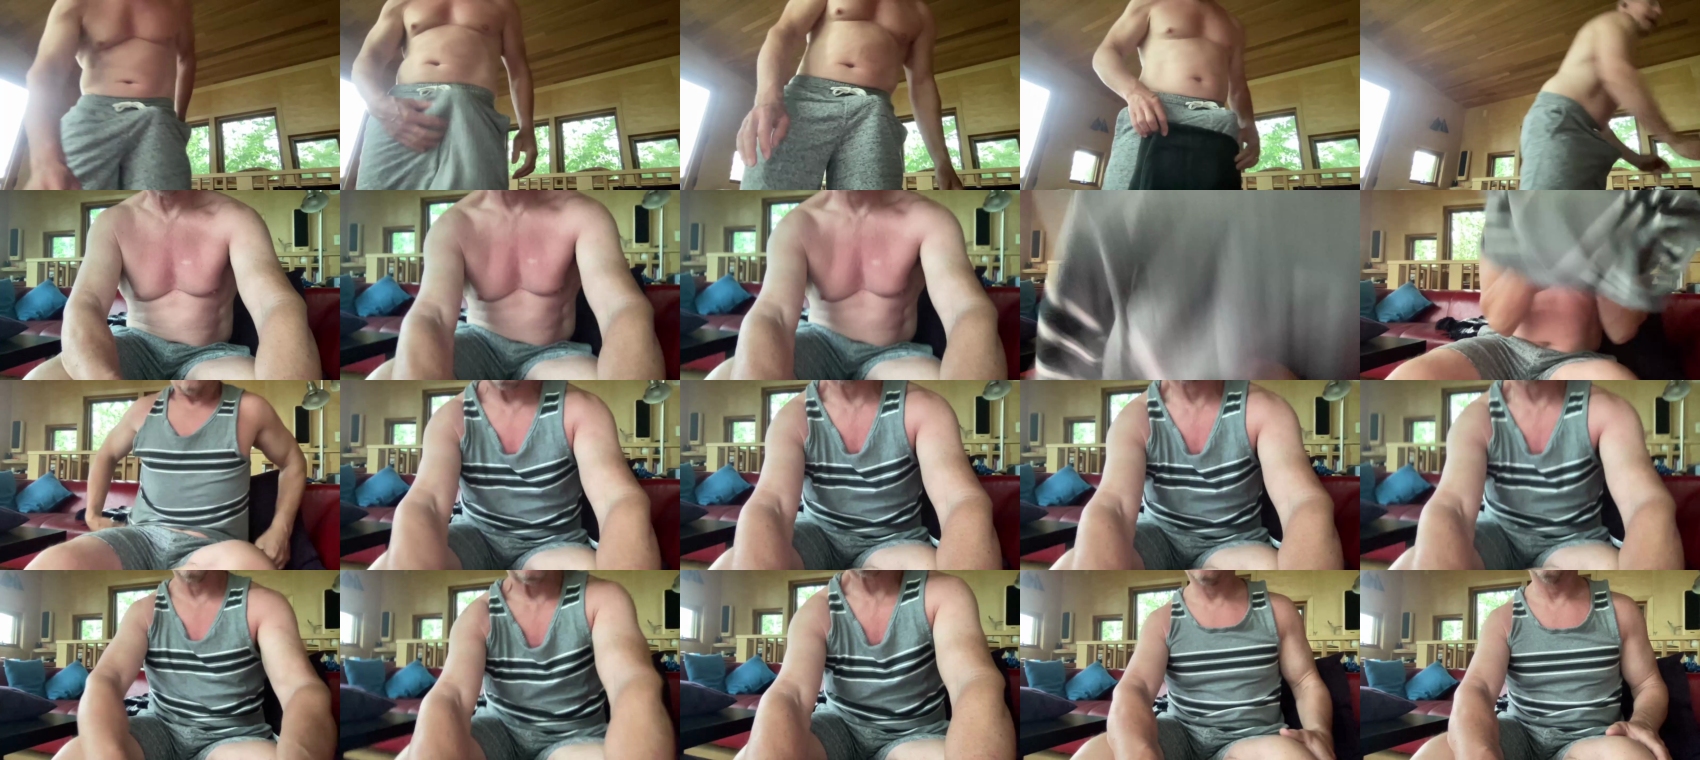 fitdaddy1960 hard CAM SHOW @ Chaturbate 21-06-2022